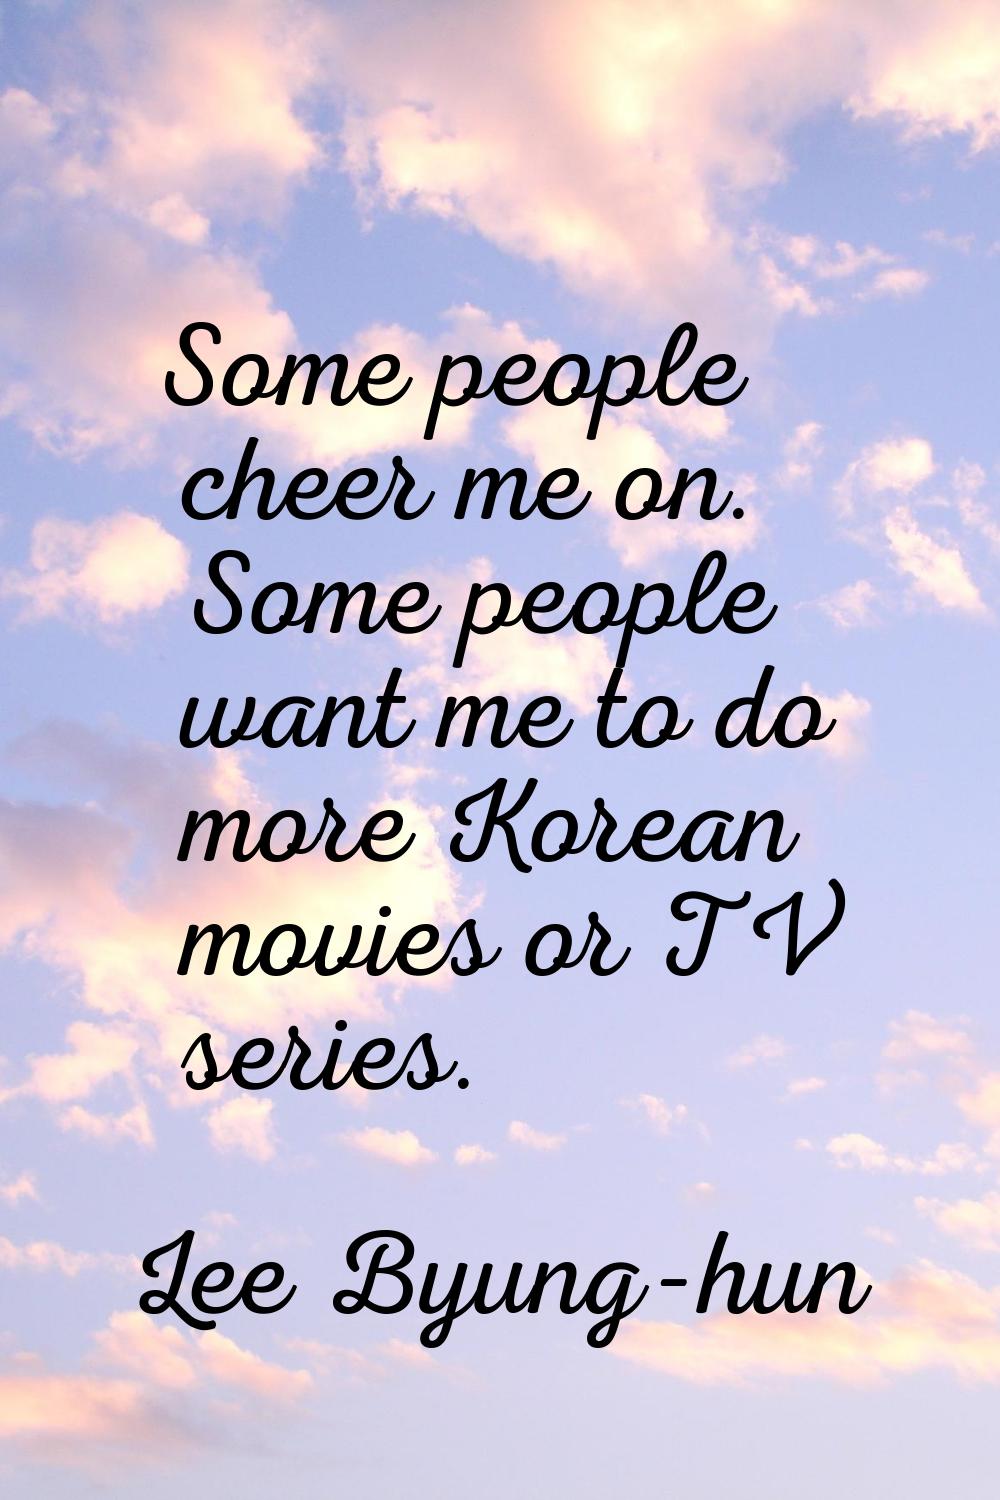 Some people cheer me on. Some people want me to do more Korean movies or TV series.